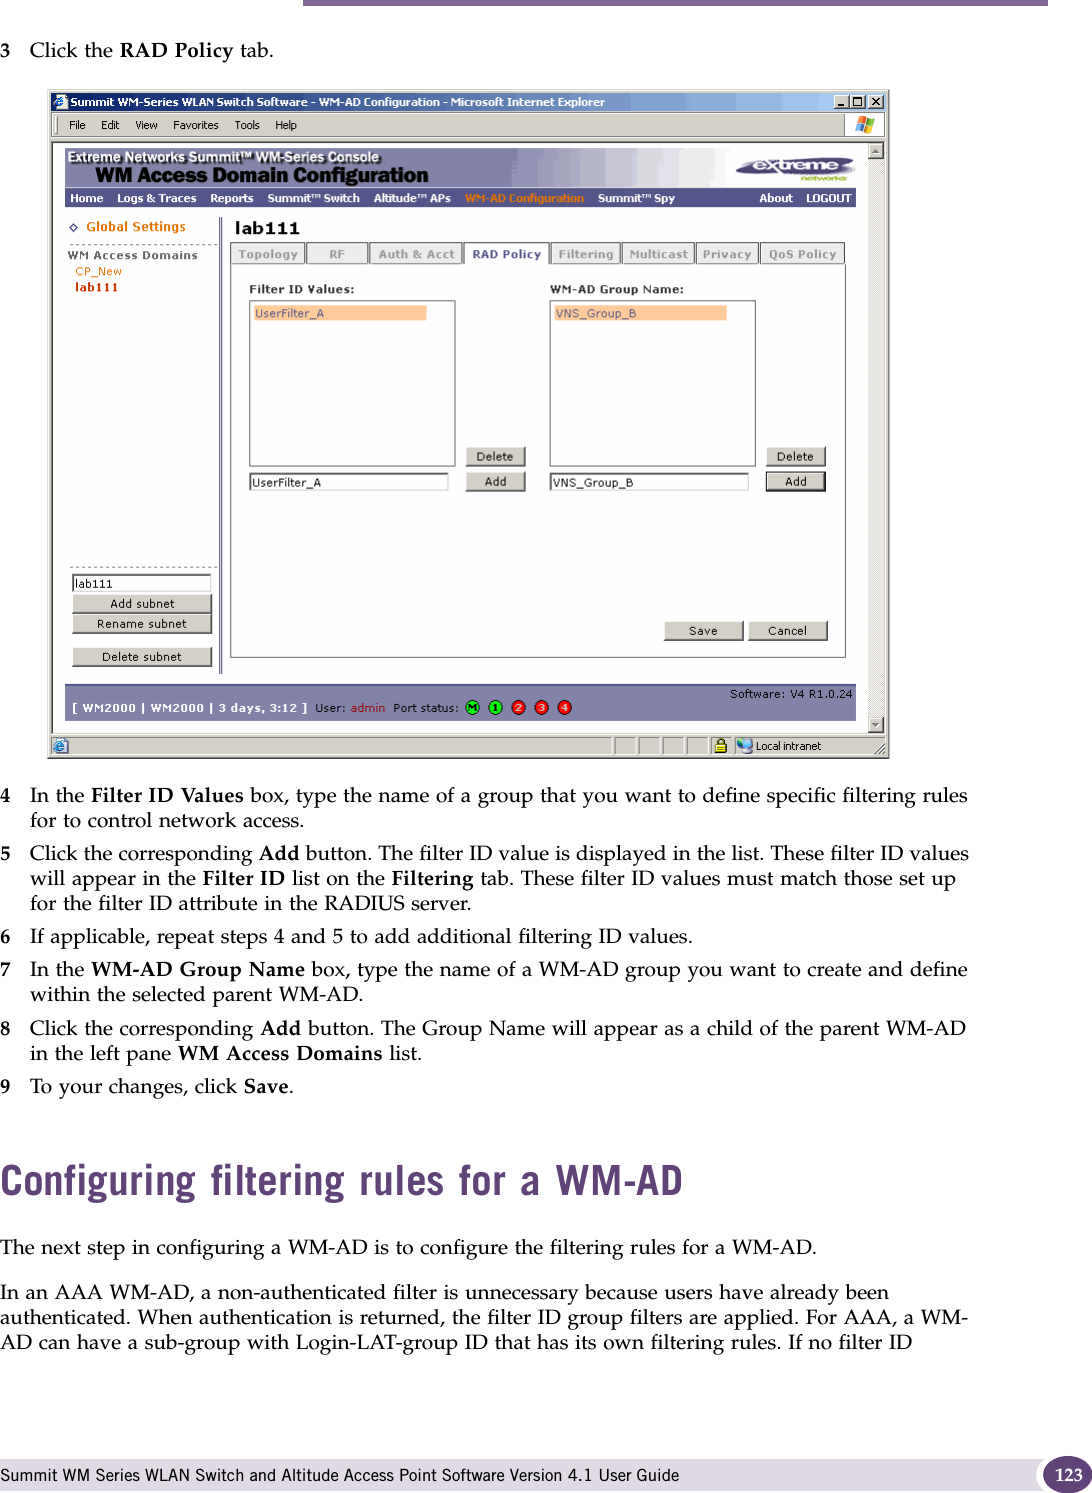 Configuring filtering rules for a WM-AD Summit WM Series WLAN Switch and Altitude Access Point Software Version 4.1 User Guide 1233Click the RAD Policy tab.4In the Filter ID Values box, type the name of a group that you want to define specific filtering rules for to control network access. 5Click the corresponding Add button. The filter ID value is displayed in the list. These filter ID values will appear in the Filter ID list on the Filtering tab. These filter ID values must match those set up for the filter ID attribute in the RADIUS server.6If applicable, repeat steps 4 and 5 to add additional filtering ID values.7In the WM-AD Group Name box, type the name of a WM-AD group you want to create and define within the selected parent WM-AD.8Click the corresponding Add button. The Group Name will appear as a child of the parent WM-AD in the left pane WM Access Domains list.9To your changes, click Save.Configuring filtering rules for a WM-ADThe next step in configuring a WM-AD is to configure the filtering rules for a WM-AD. In an AAA WM-AD, a non-authenticated filter is unnecessary because users have already been authenticated. When authentication is returned, the filter ID group filters are applied. For AAA, a WM-AD can have a sub-group with Login-LAT-group ID that has its own filtering rules. If no filter ID 